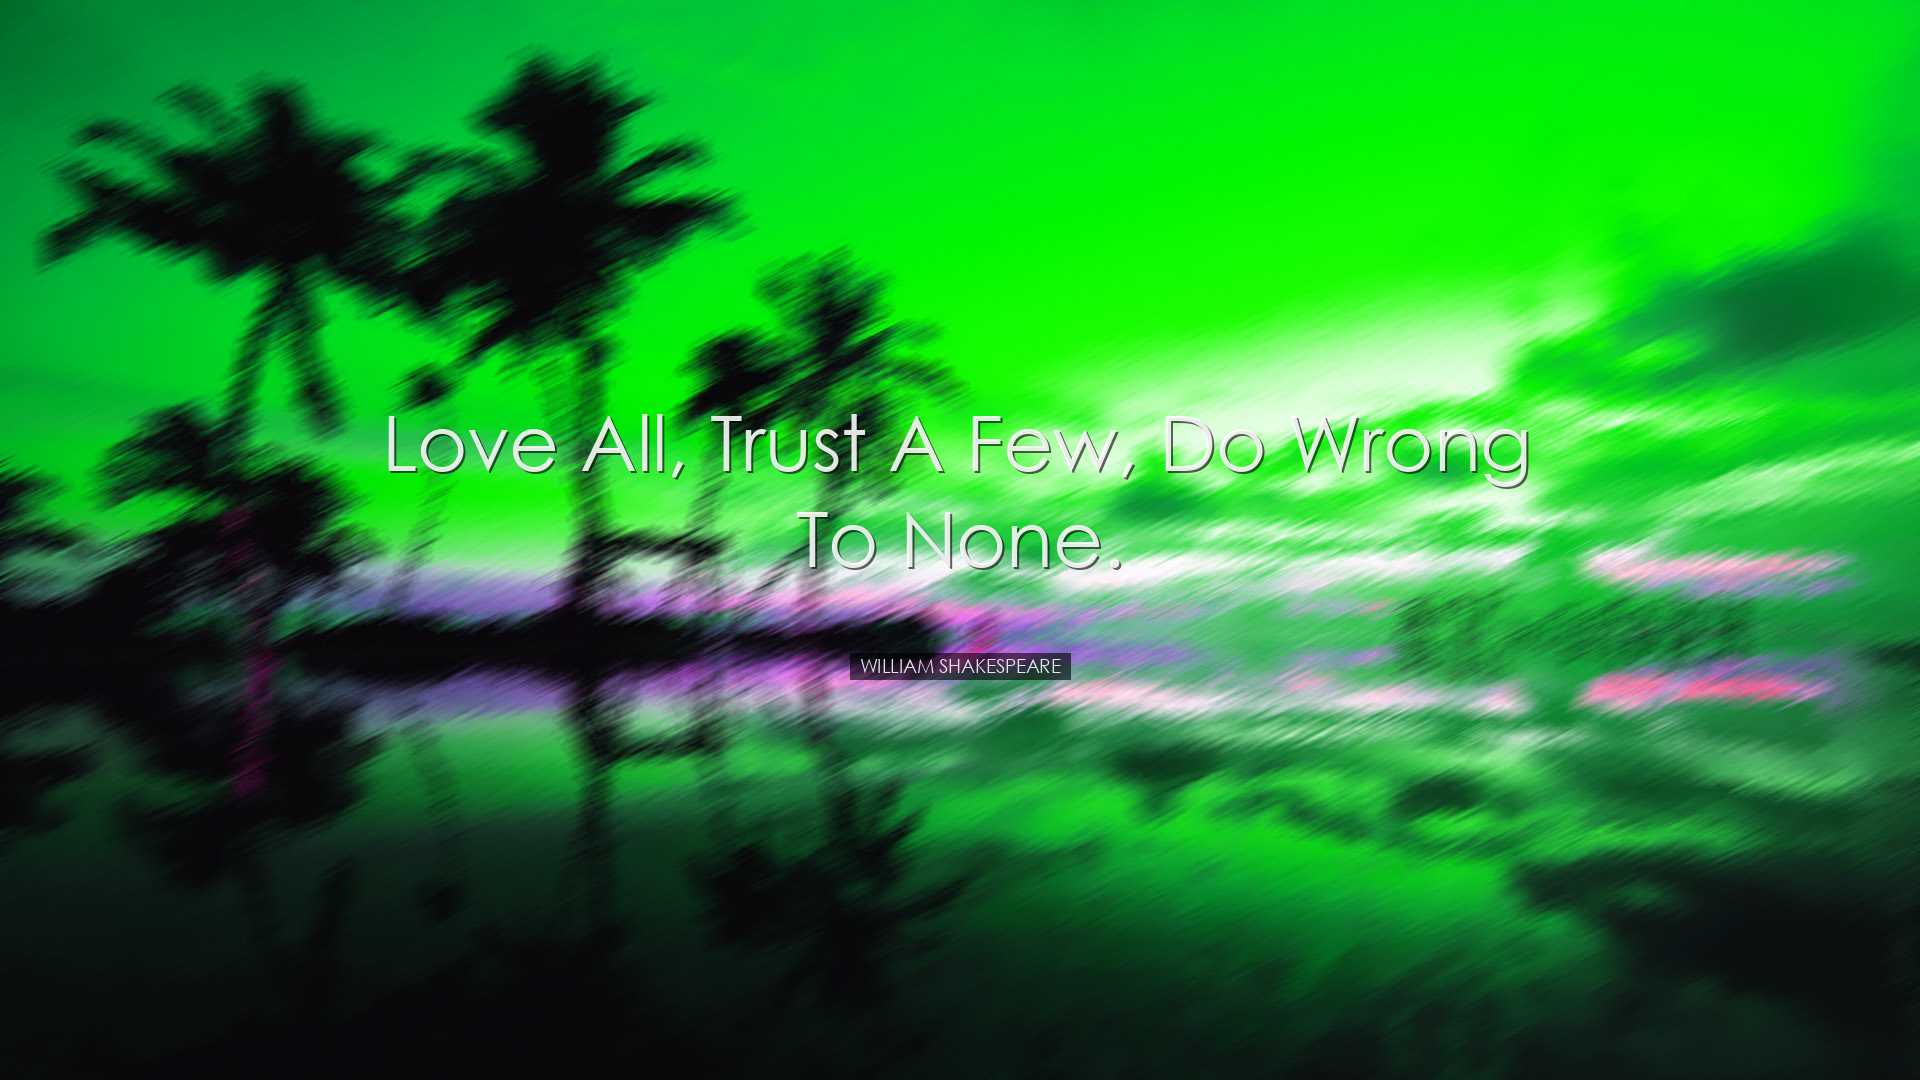 Love all, trust a few, do wrong to none. - William Shakespeare